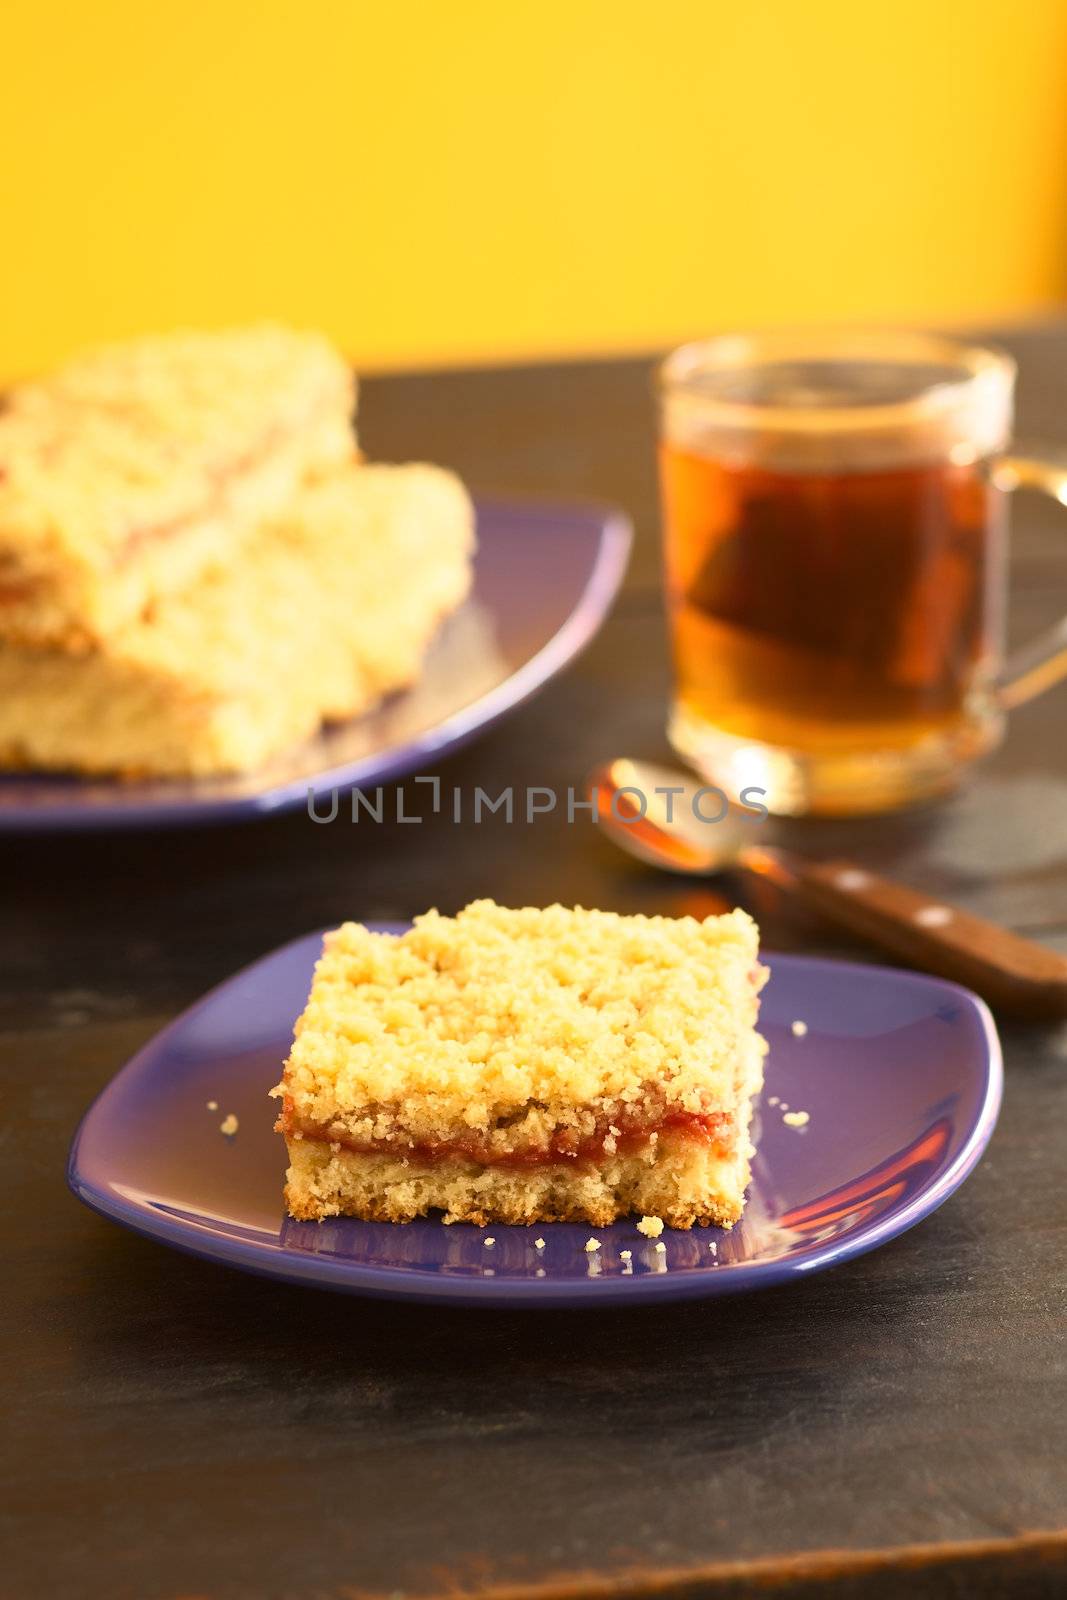 German cake called Streuselkuchen (Crumble cake) made of a yeast dough with jam and crumbles on top (Selective Focus, Focus on the front of the cake piece)